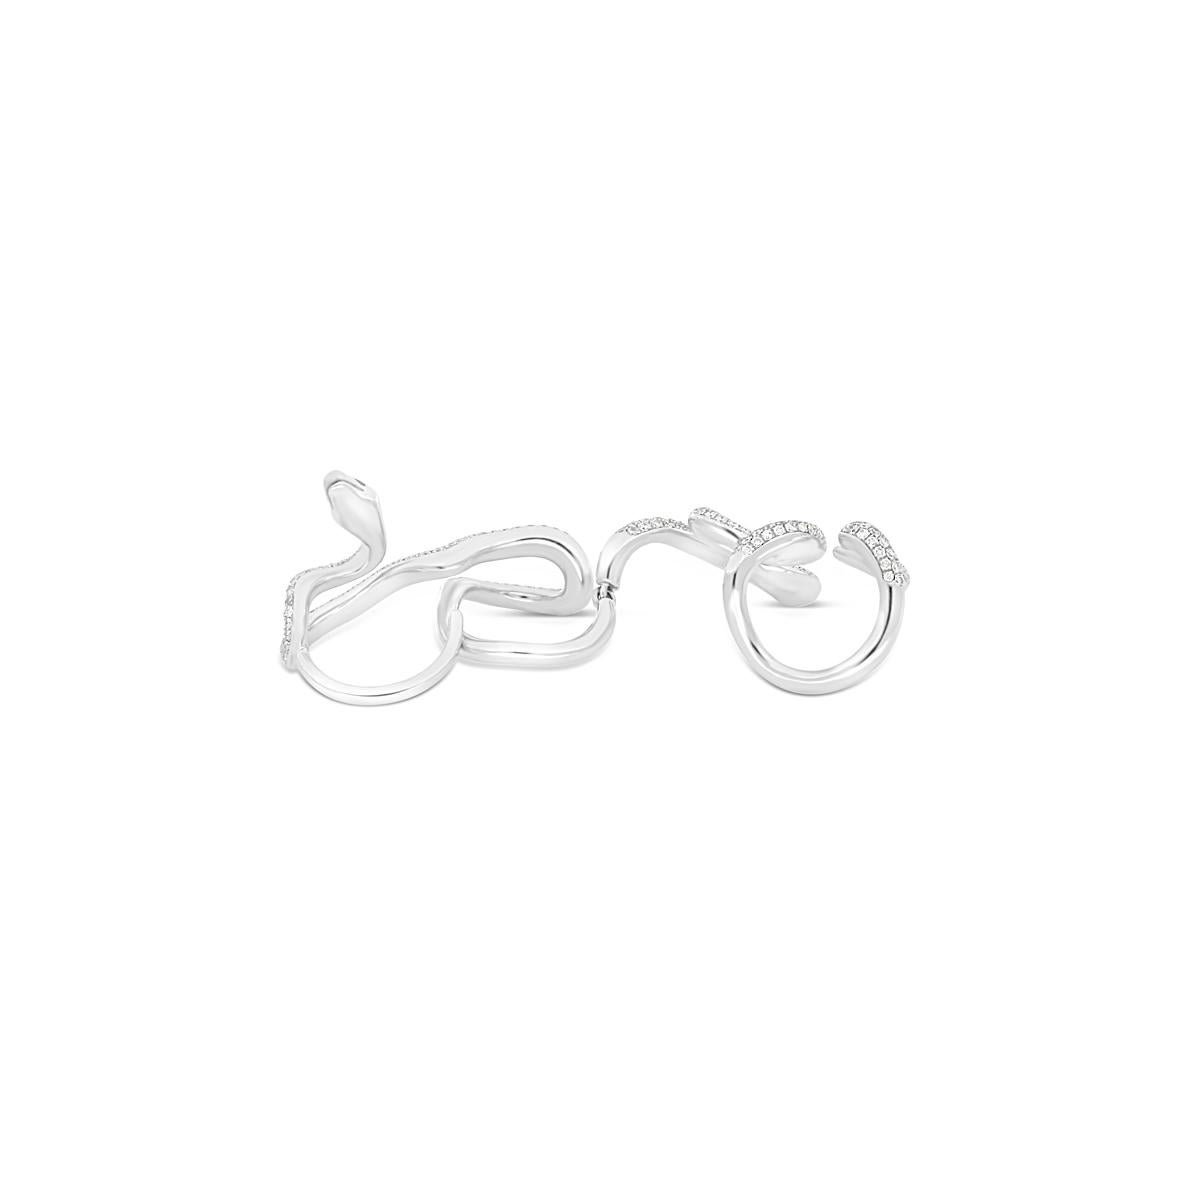 This 4-finger snake ring is for women who want to celebrate their evolution. Snakes represent a creative life force. They are the most popular symbols of rebirth and transformation.
If you are obsessed with snakes right now, a transformation is